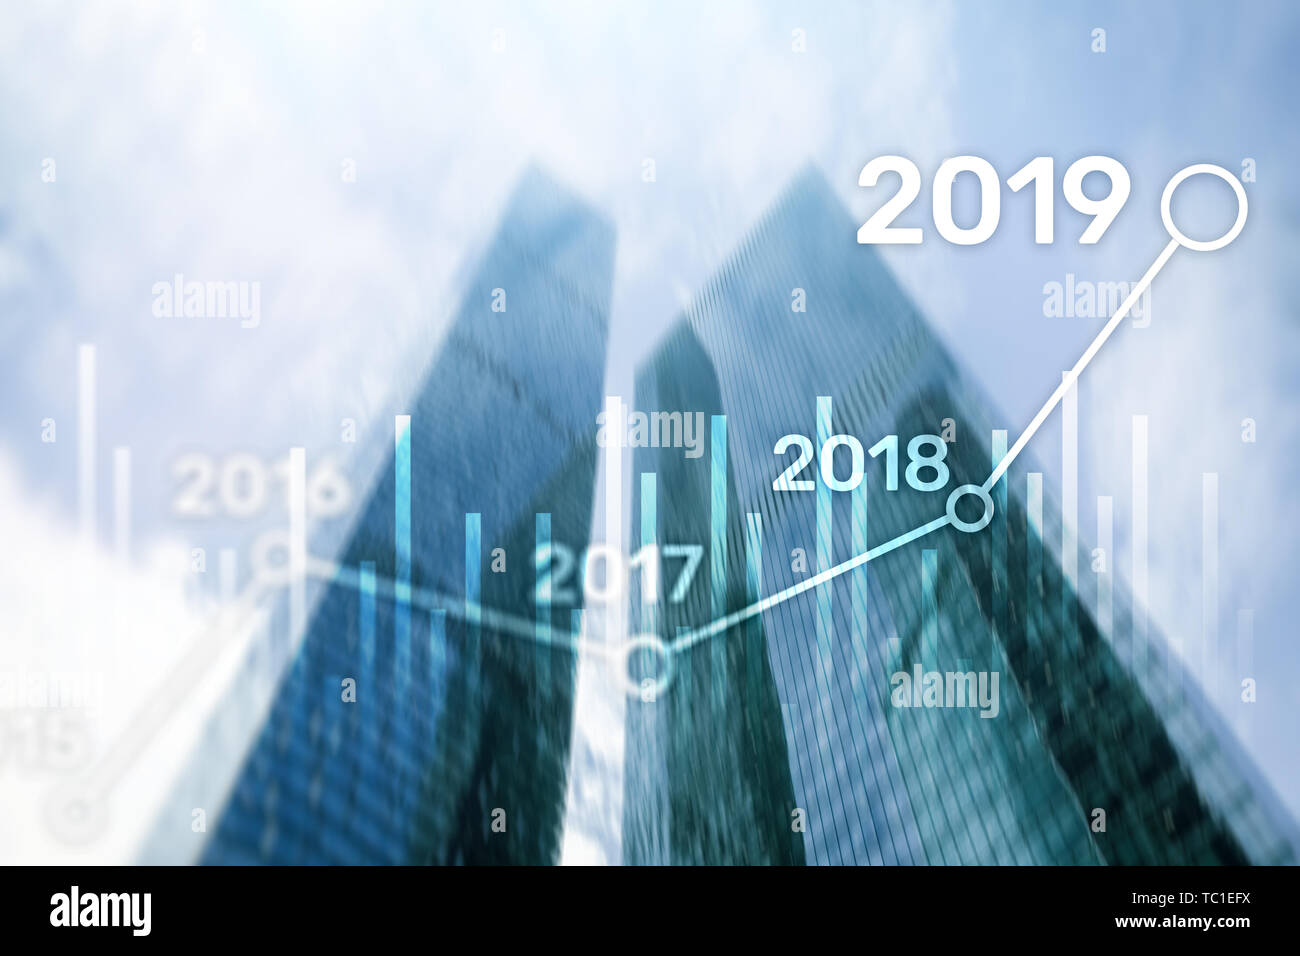 2019 Plan for Financial growth. Business and investment concept. Stock Photo